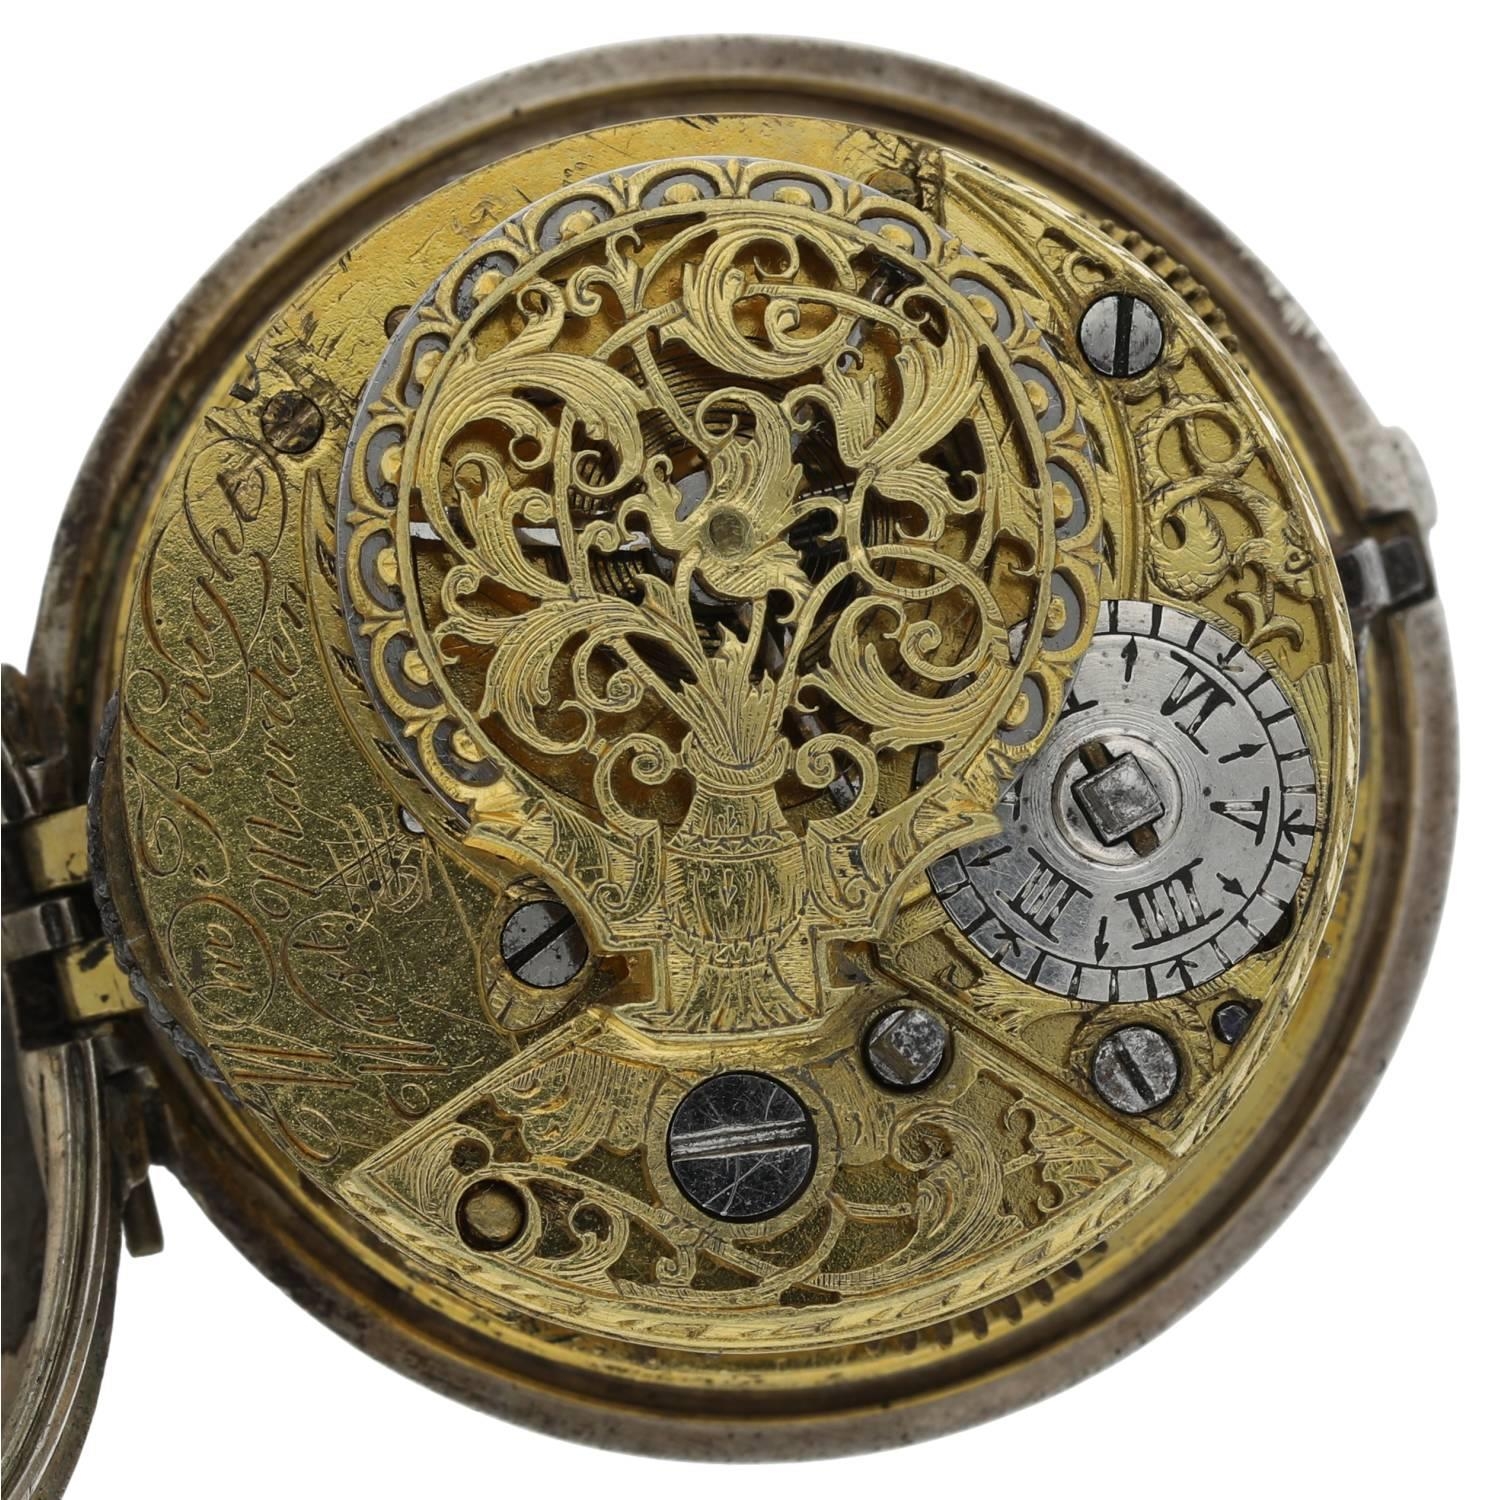 William Knight, West Marden - mid-18th century English silver pair cased verge pocket watch, - Image 4 of 10